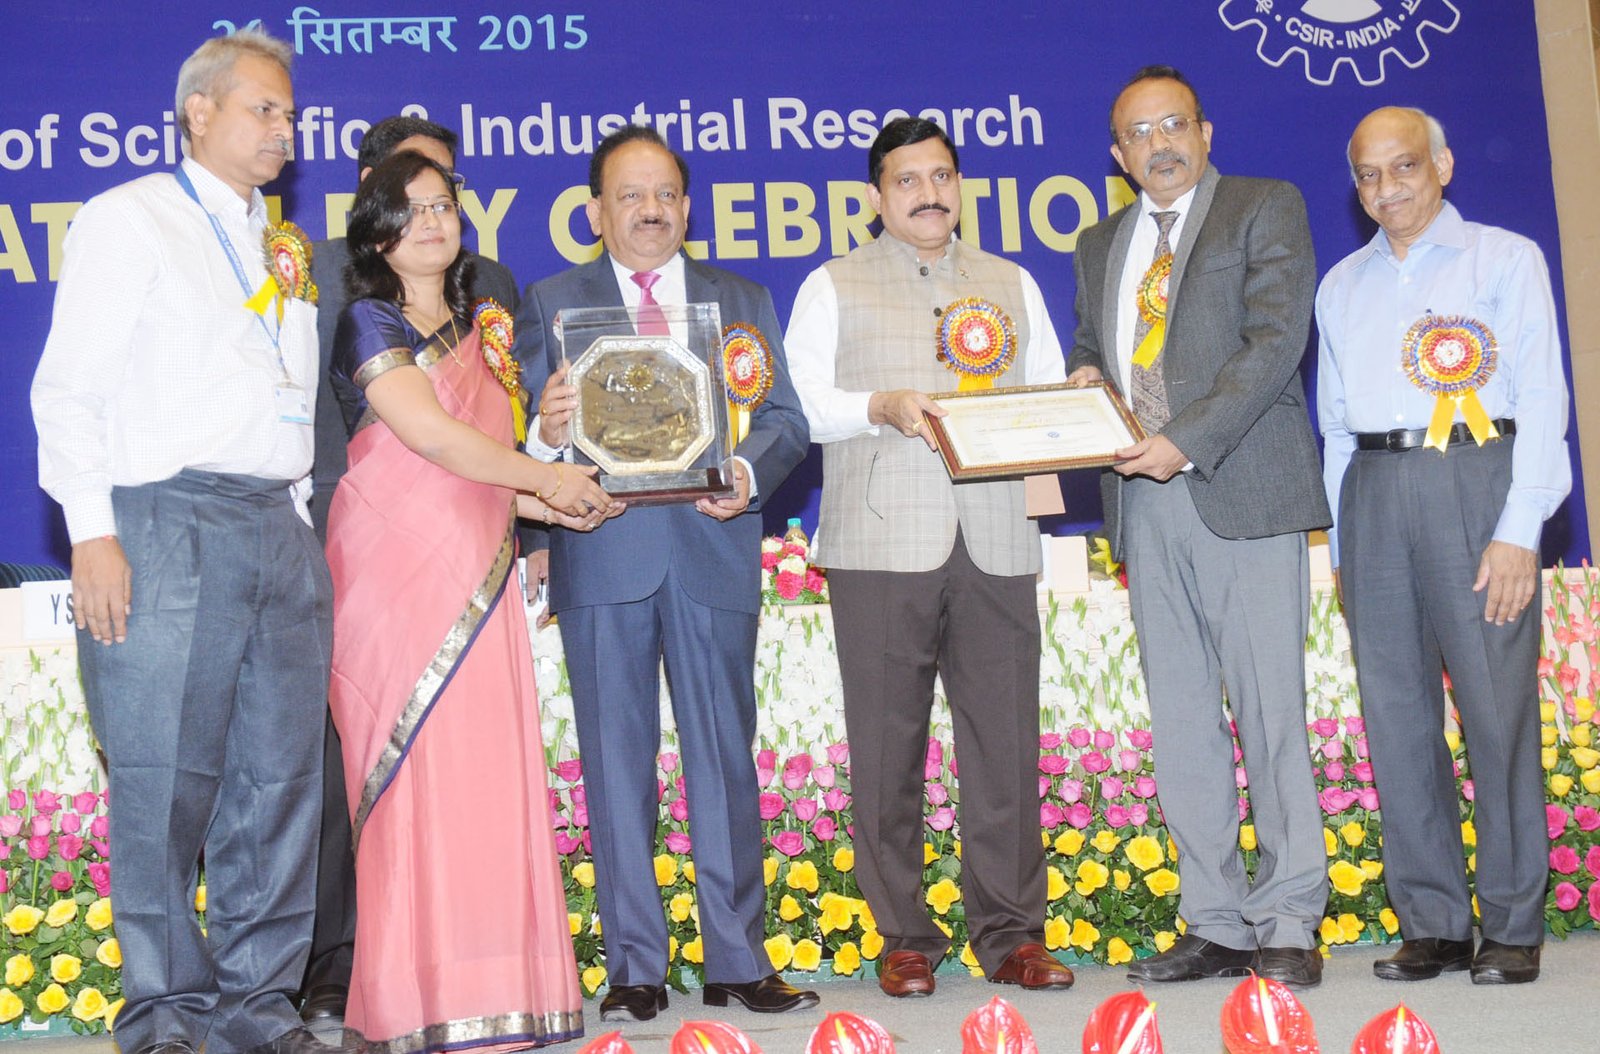 The union minister for science and technology, Dr Harsh Vardhan at the Council of Scientific and Industrial Research (CSIR) foundation day celebrations, in New Delhi on September 26, 2015